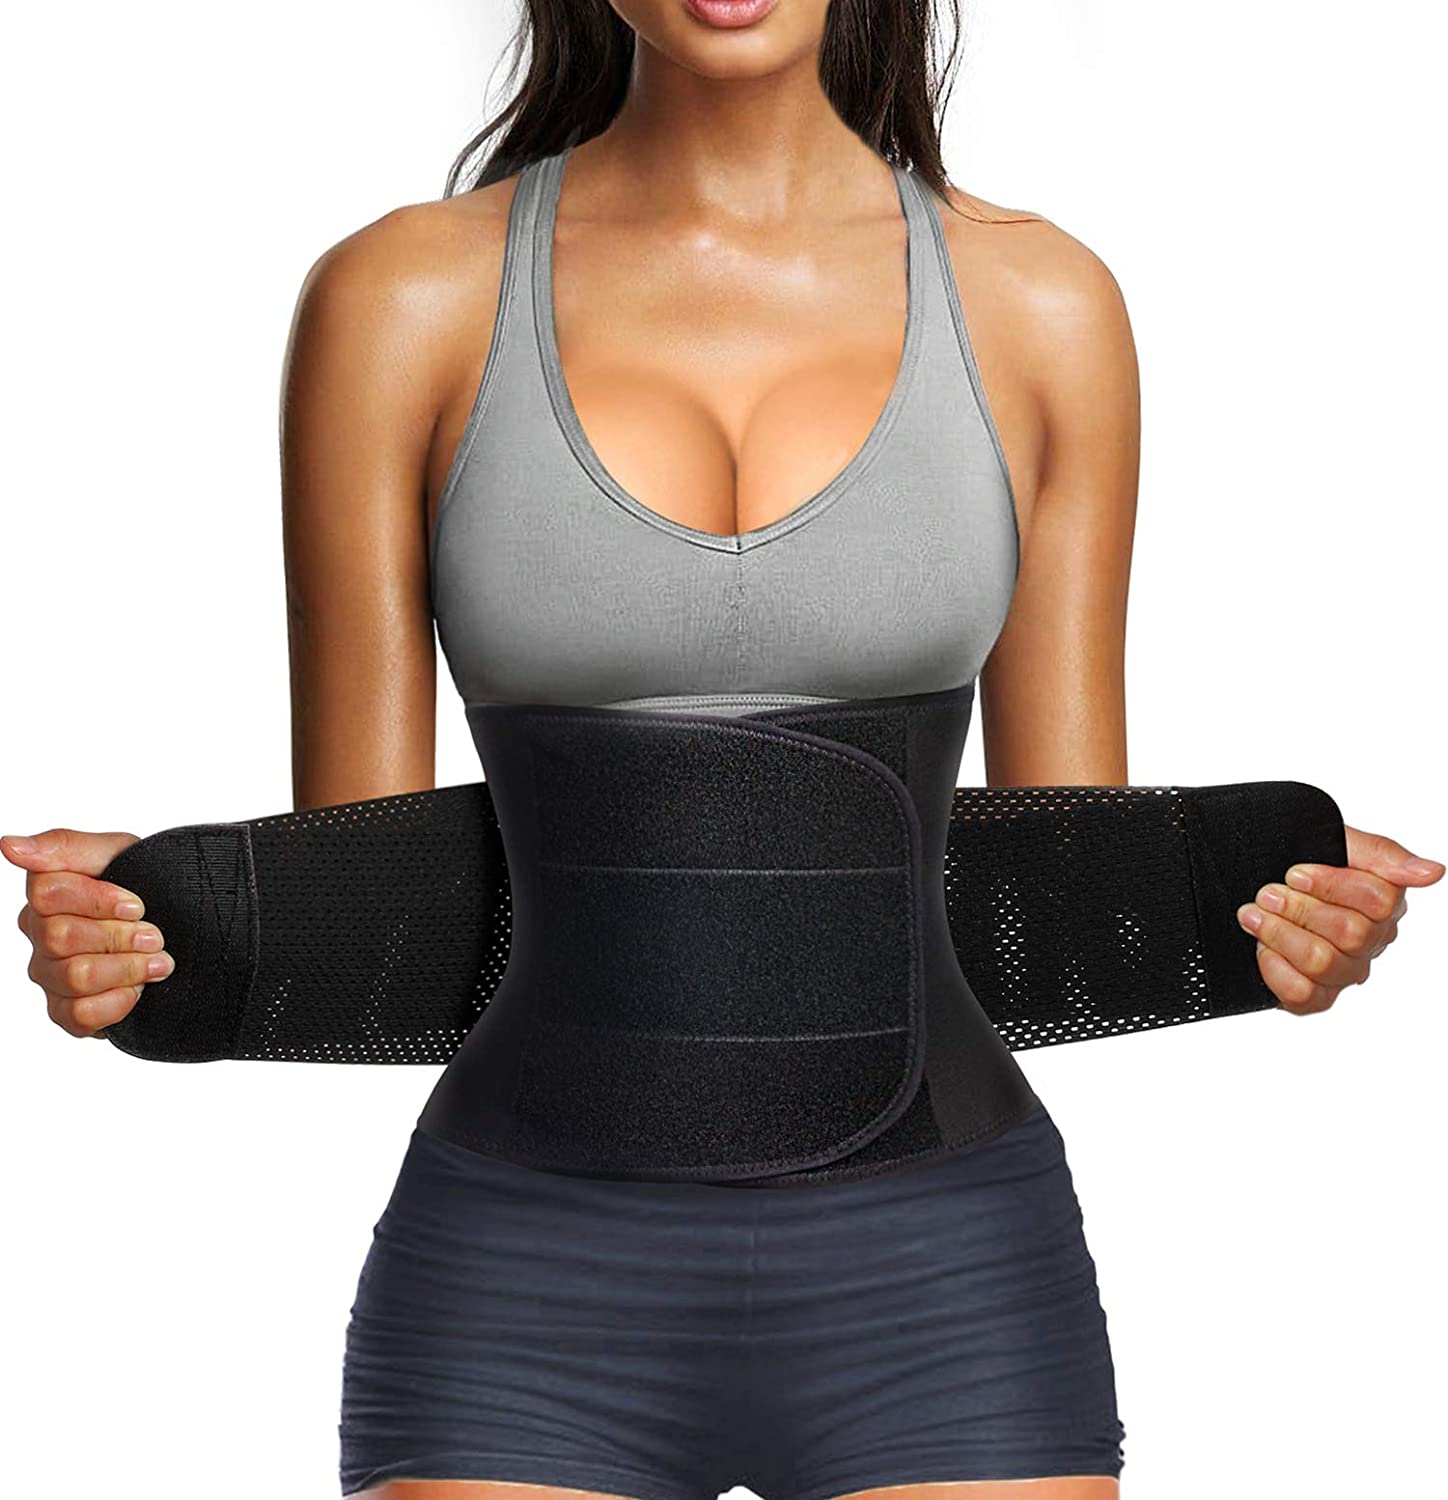 How Soon After Surgery Can I Start Waist Training Body by Yashi